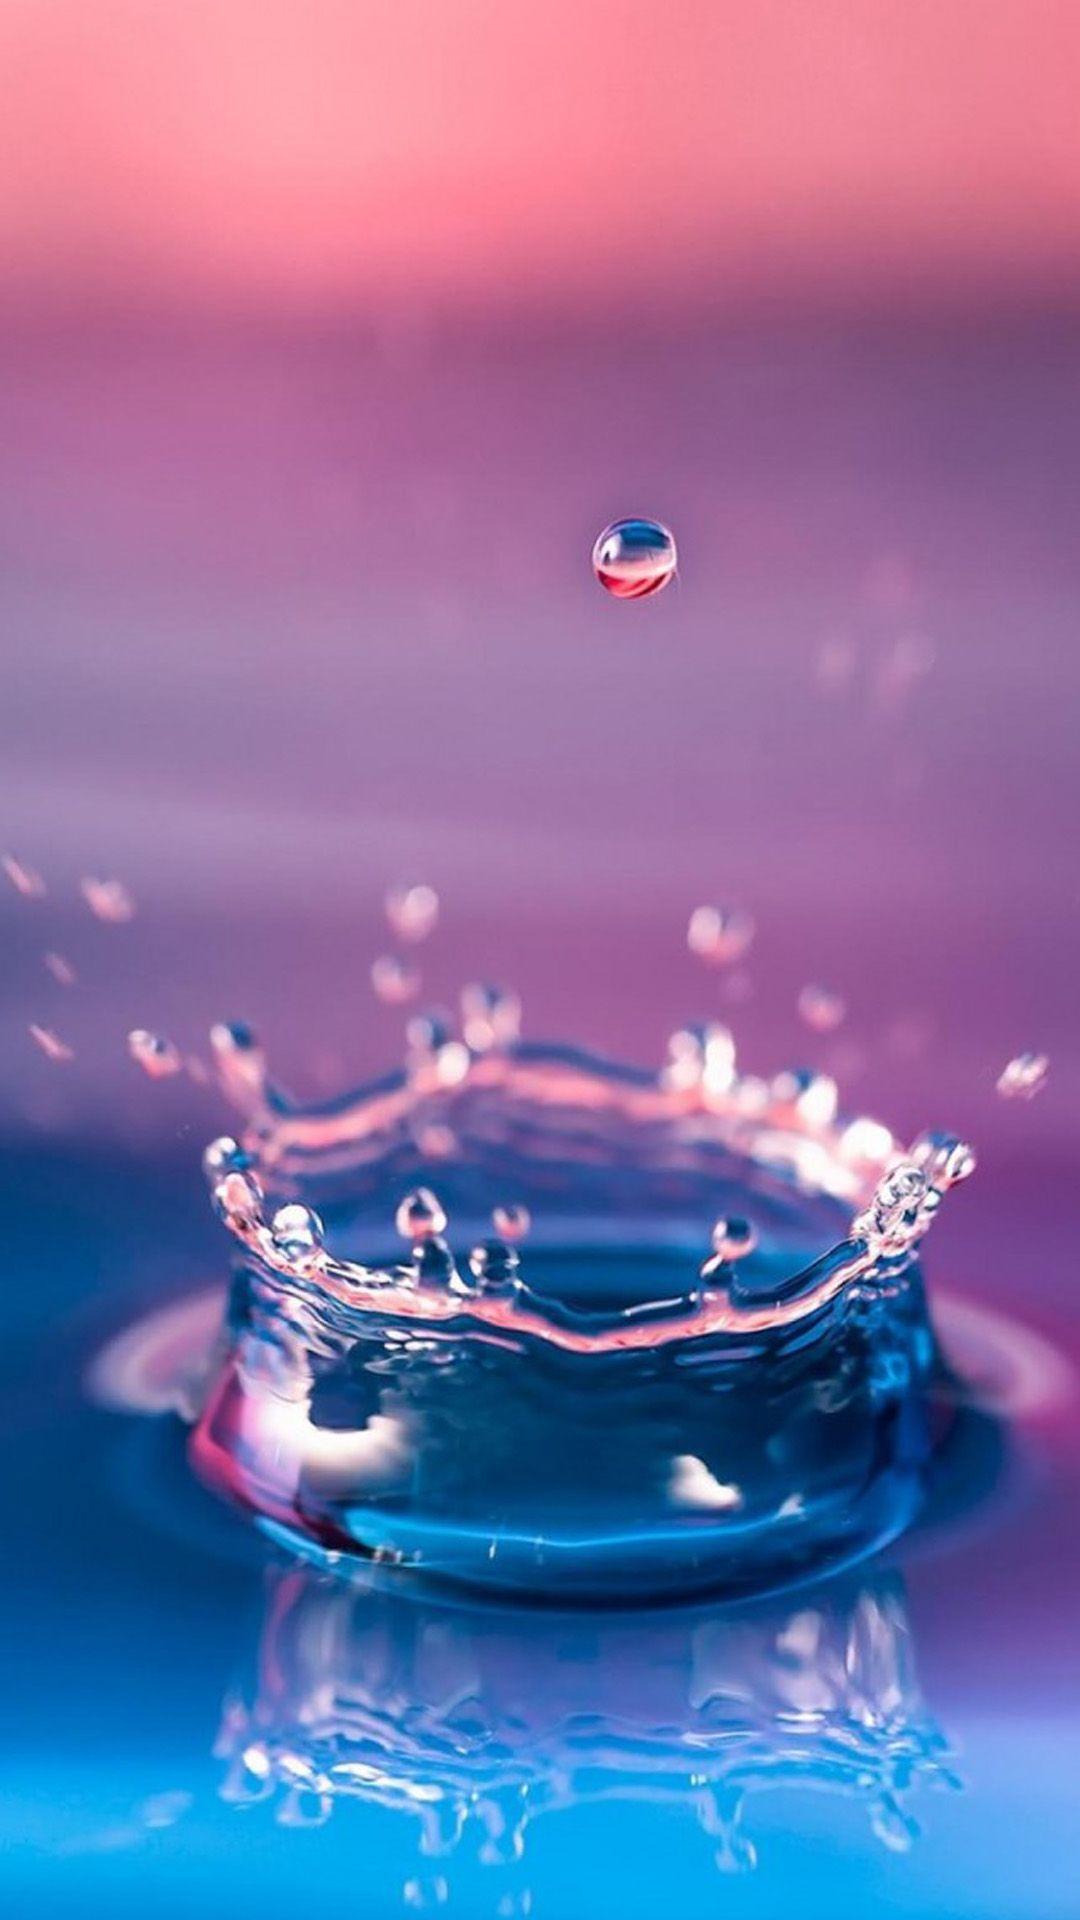 Free Download Samsung Galaxy S5 Wallpaper with Water Drop Picture